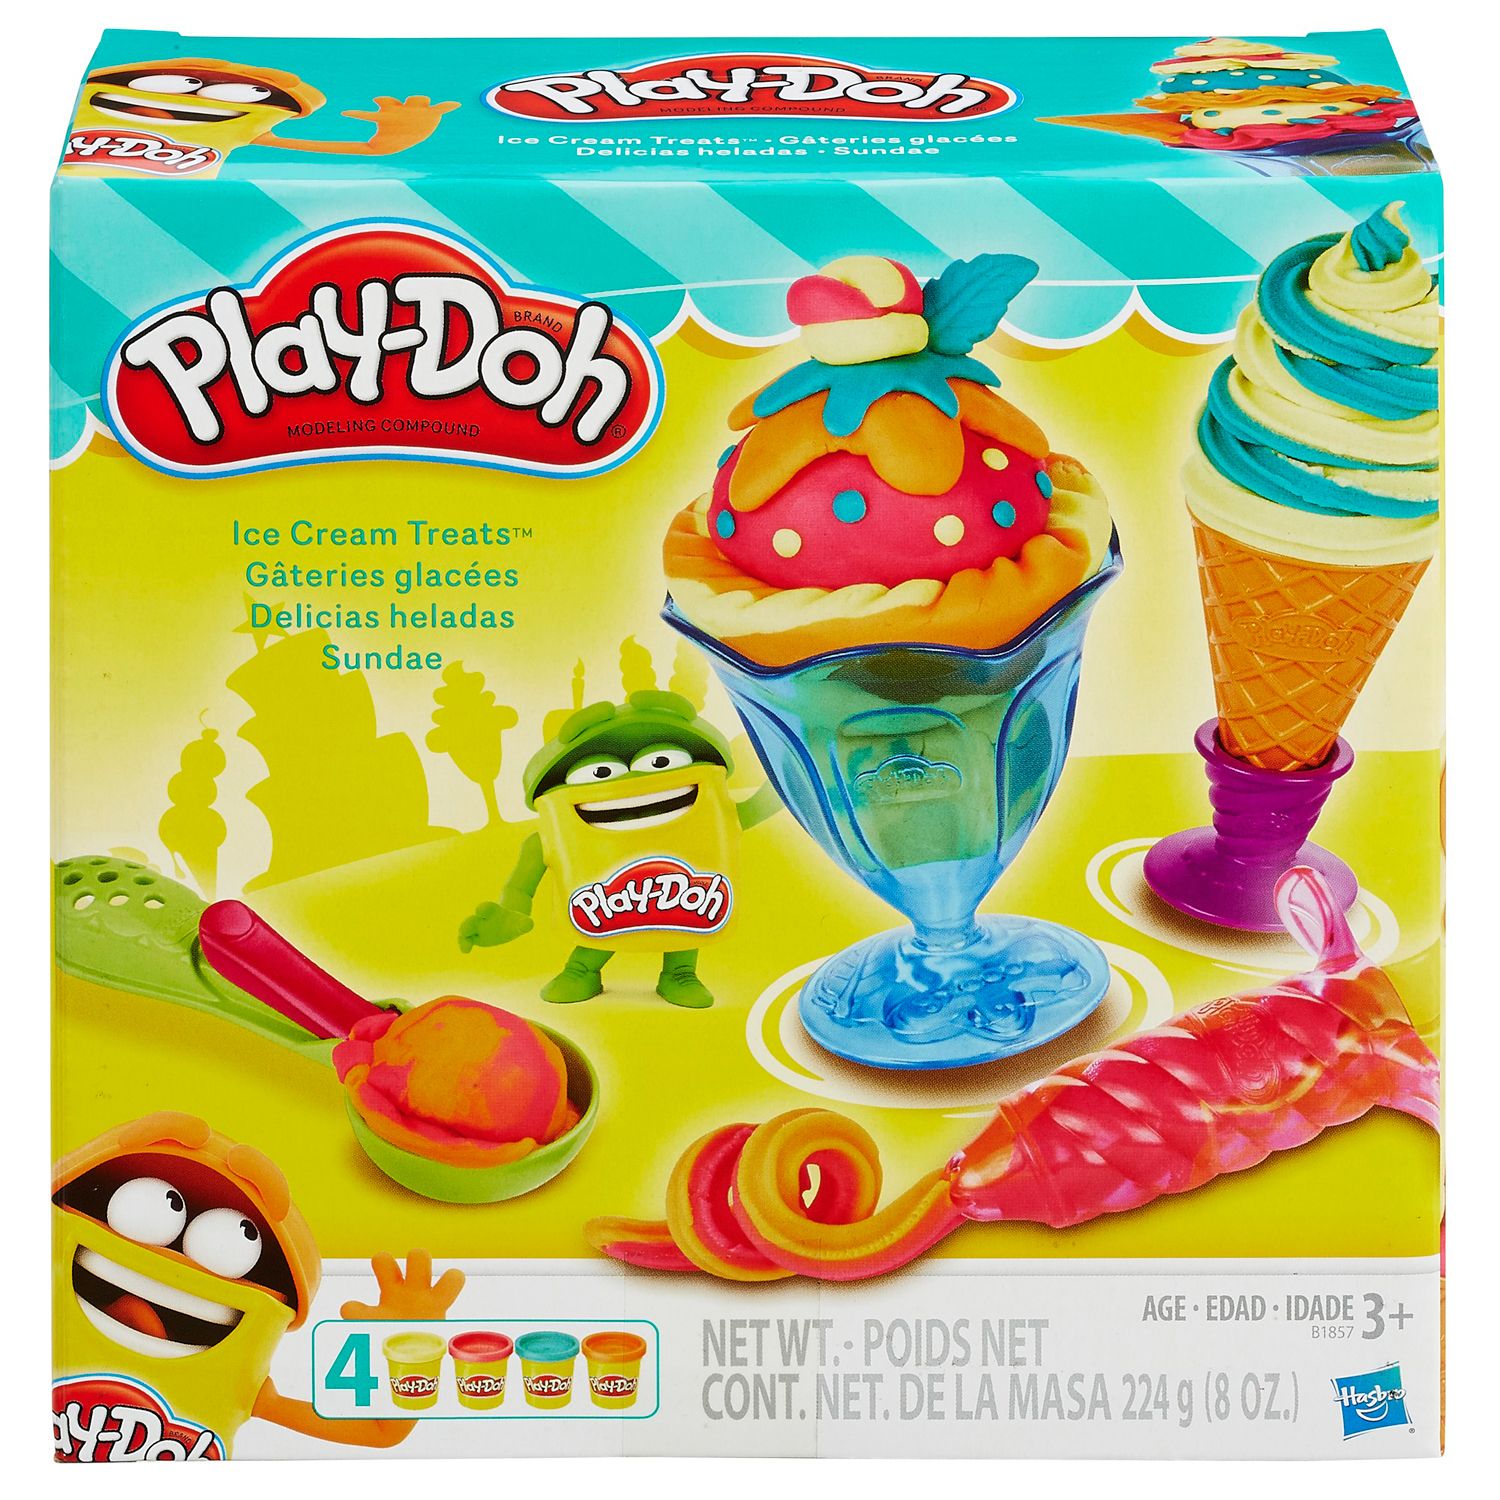 play doh set of 4